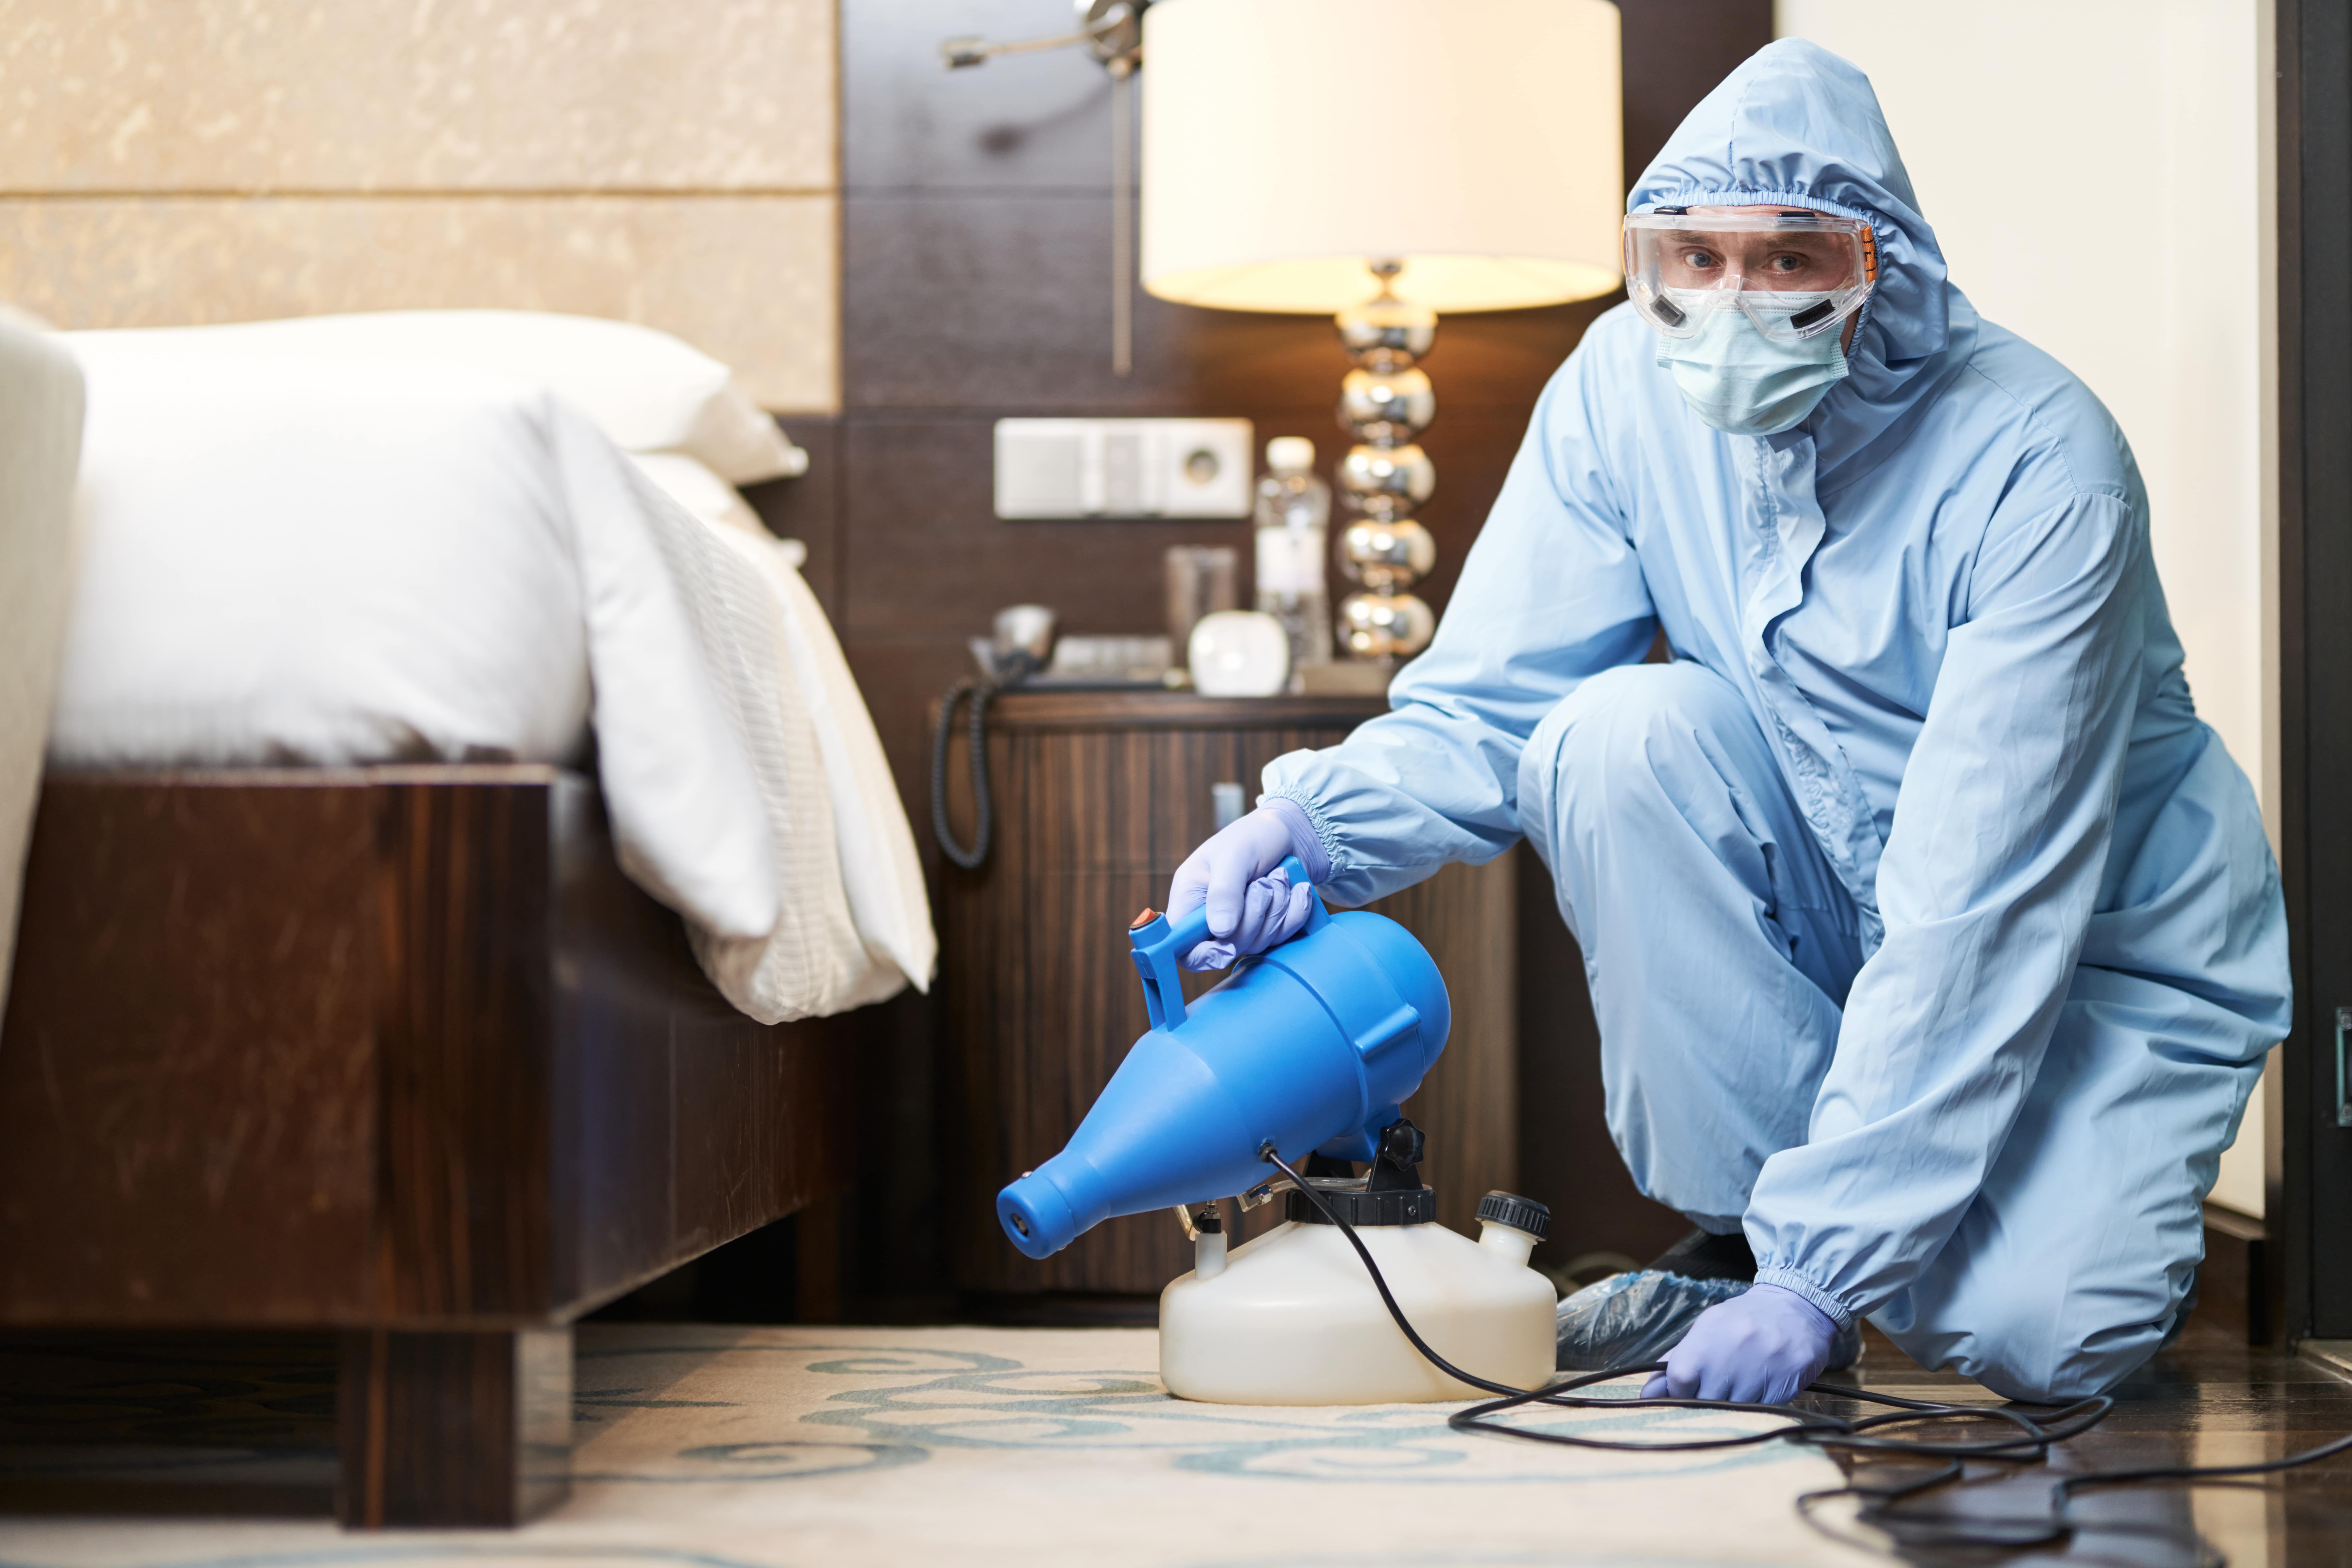 worker-in-biohazard-suit-and-mask-disinfecting-bed-min